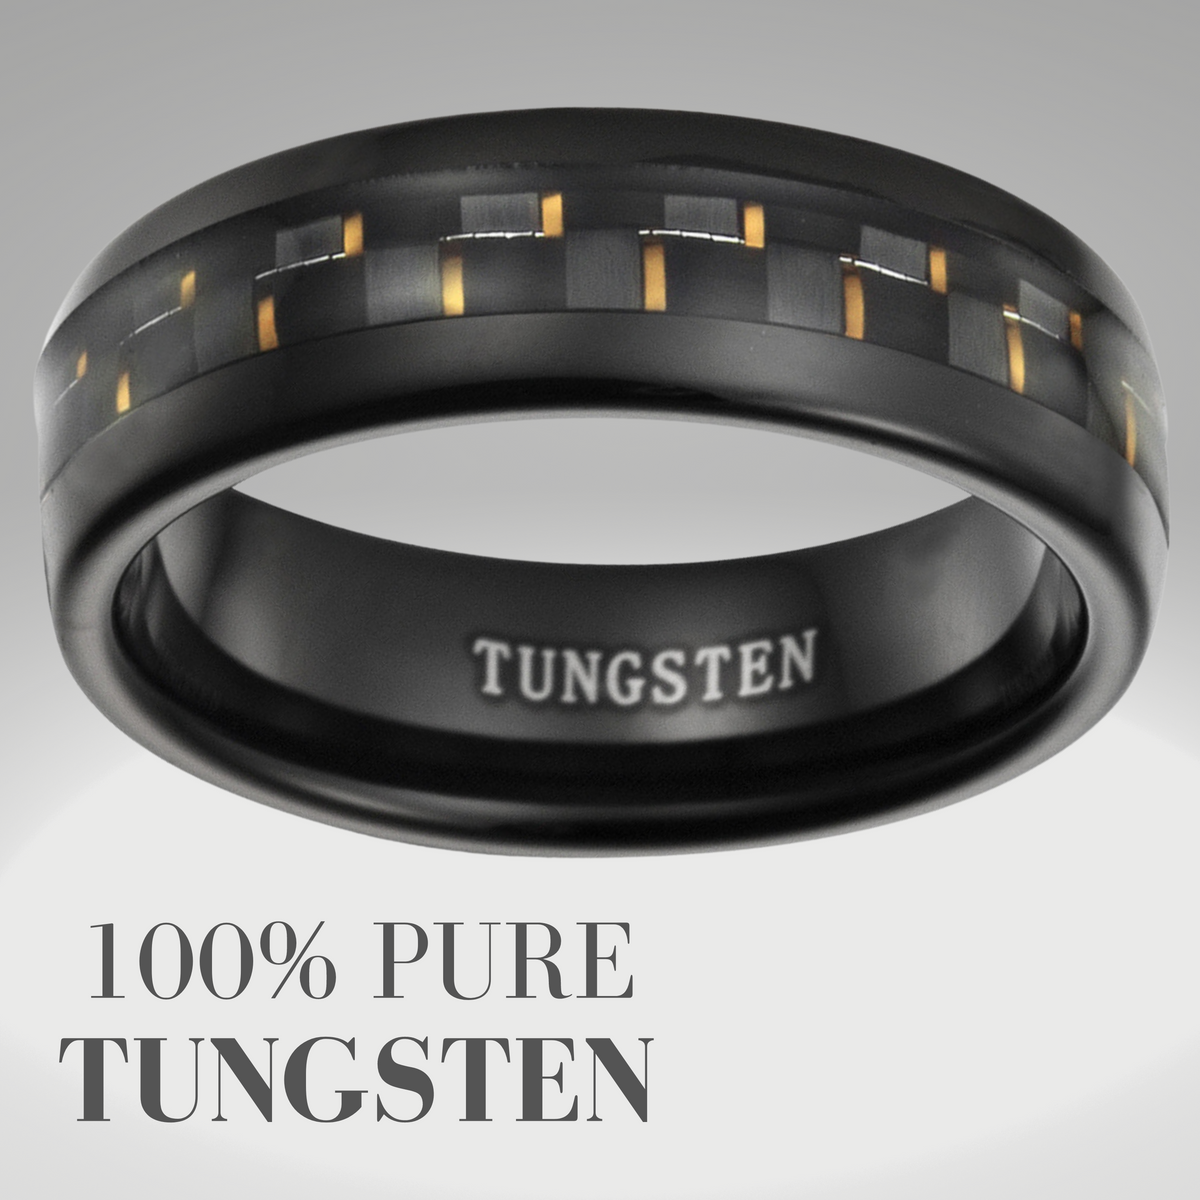 Mens Black Tungsten Ring with Carbon Fibre